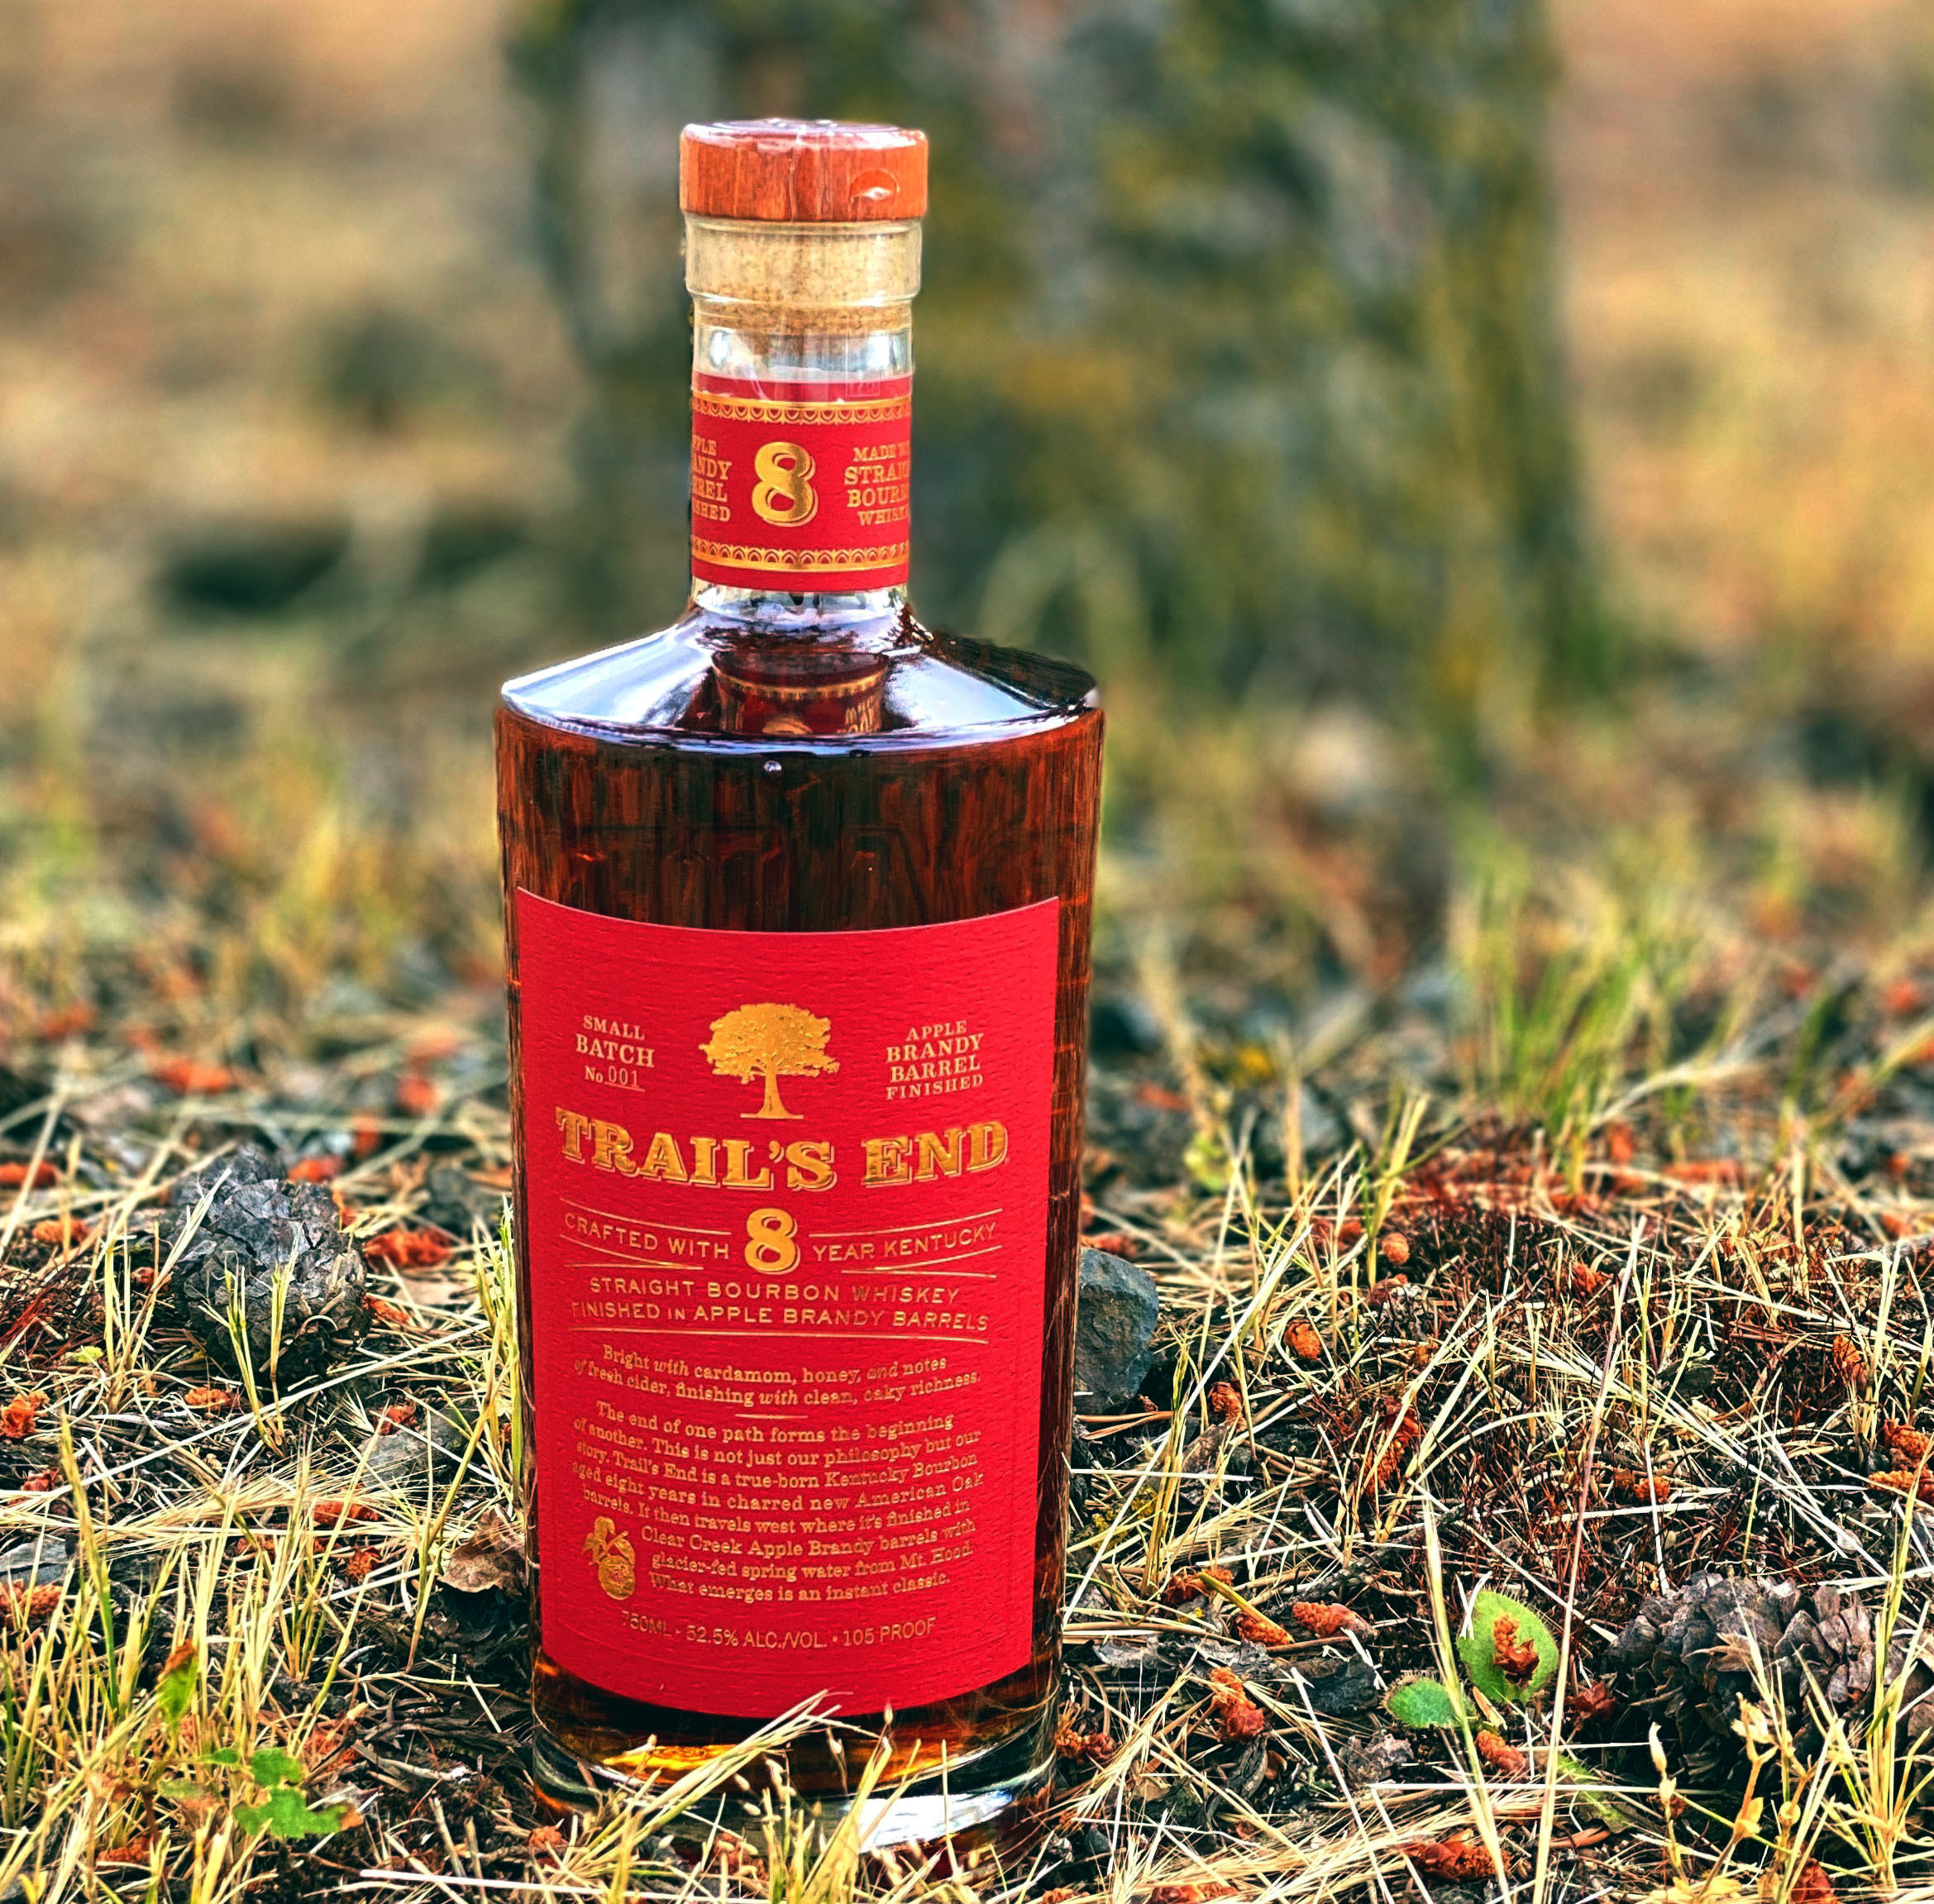 image of Trail’s End 8 Year Kentucky Straight Bourbon Whiskey Finished in Apple Brandy Barrels courtesy of Hood River Distillers